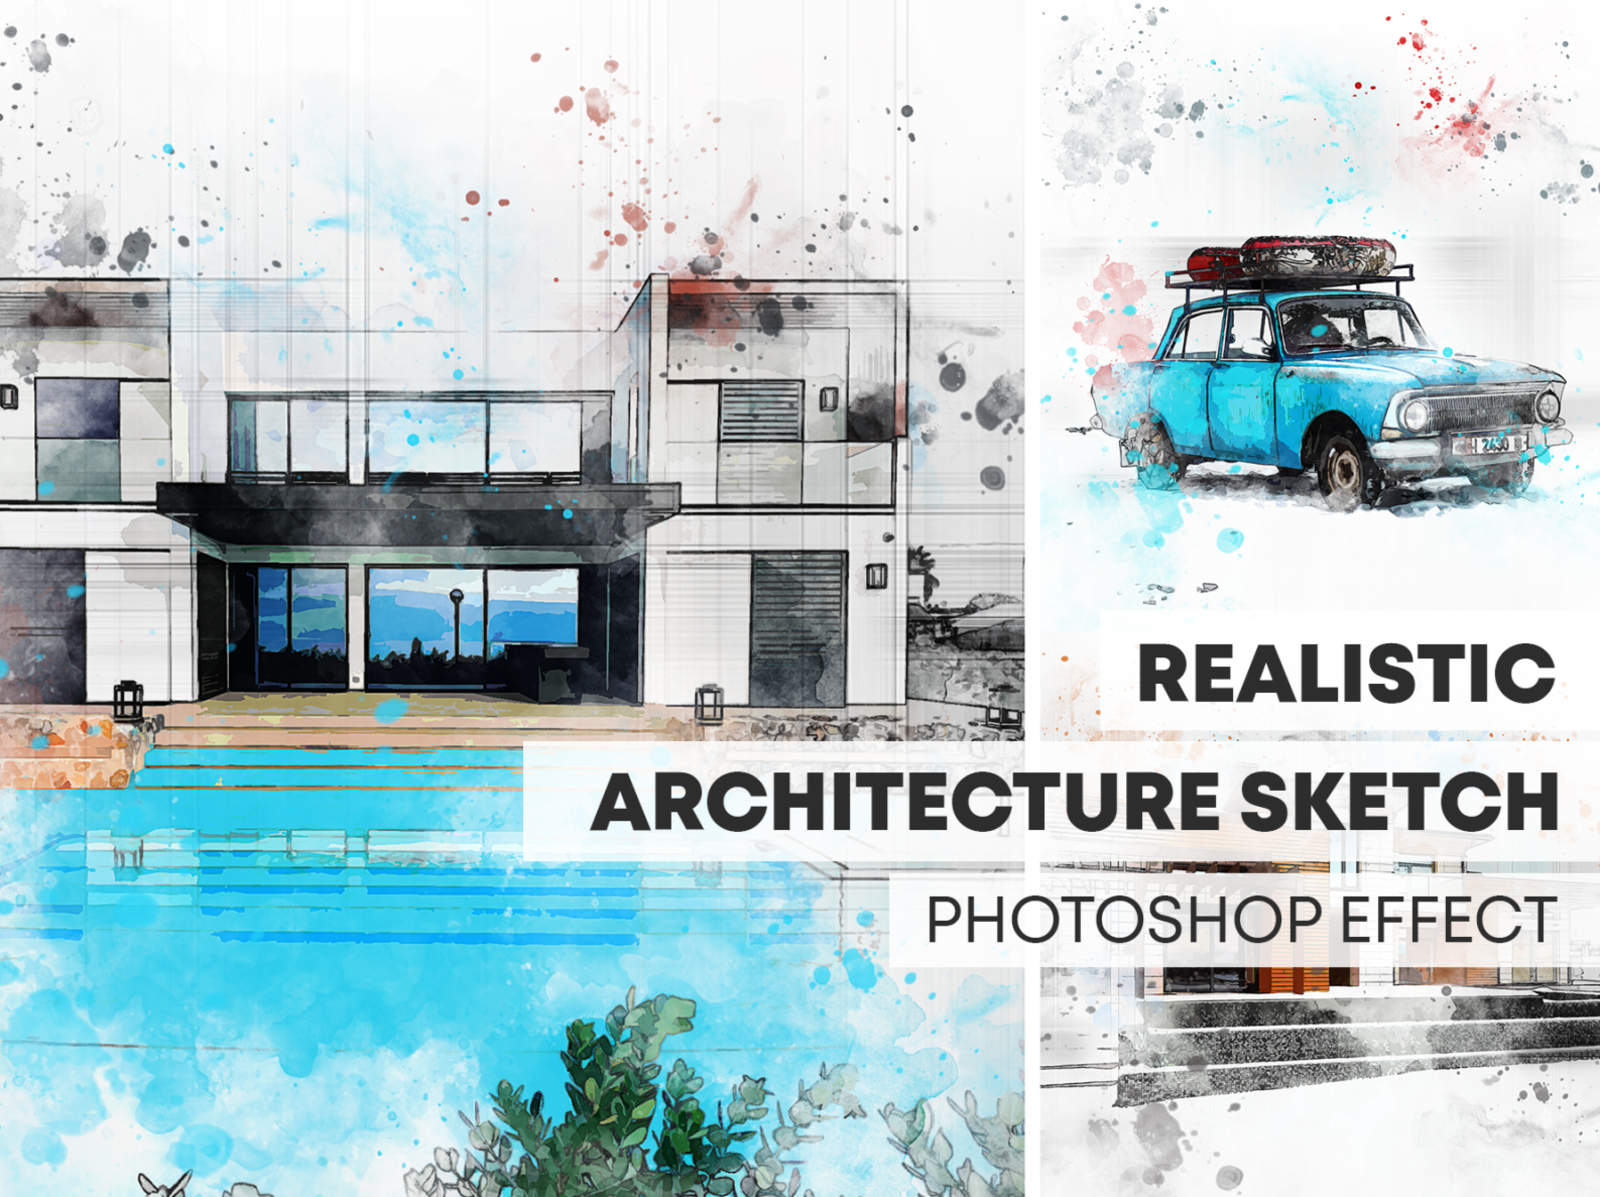 Combine architecture rendering with hand drawn sketch effect